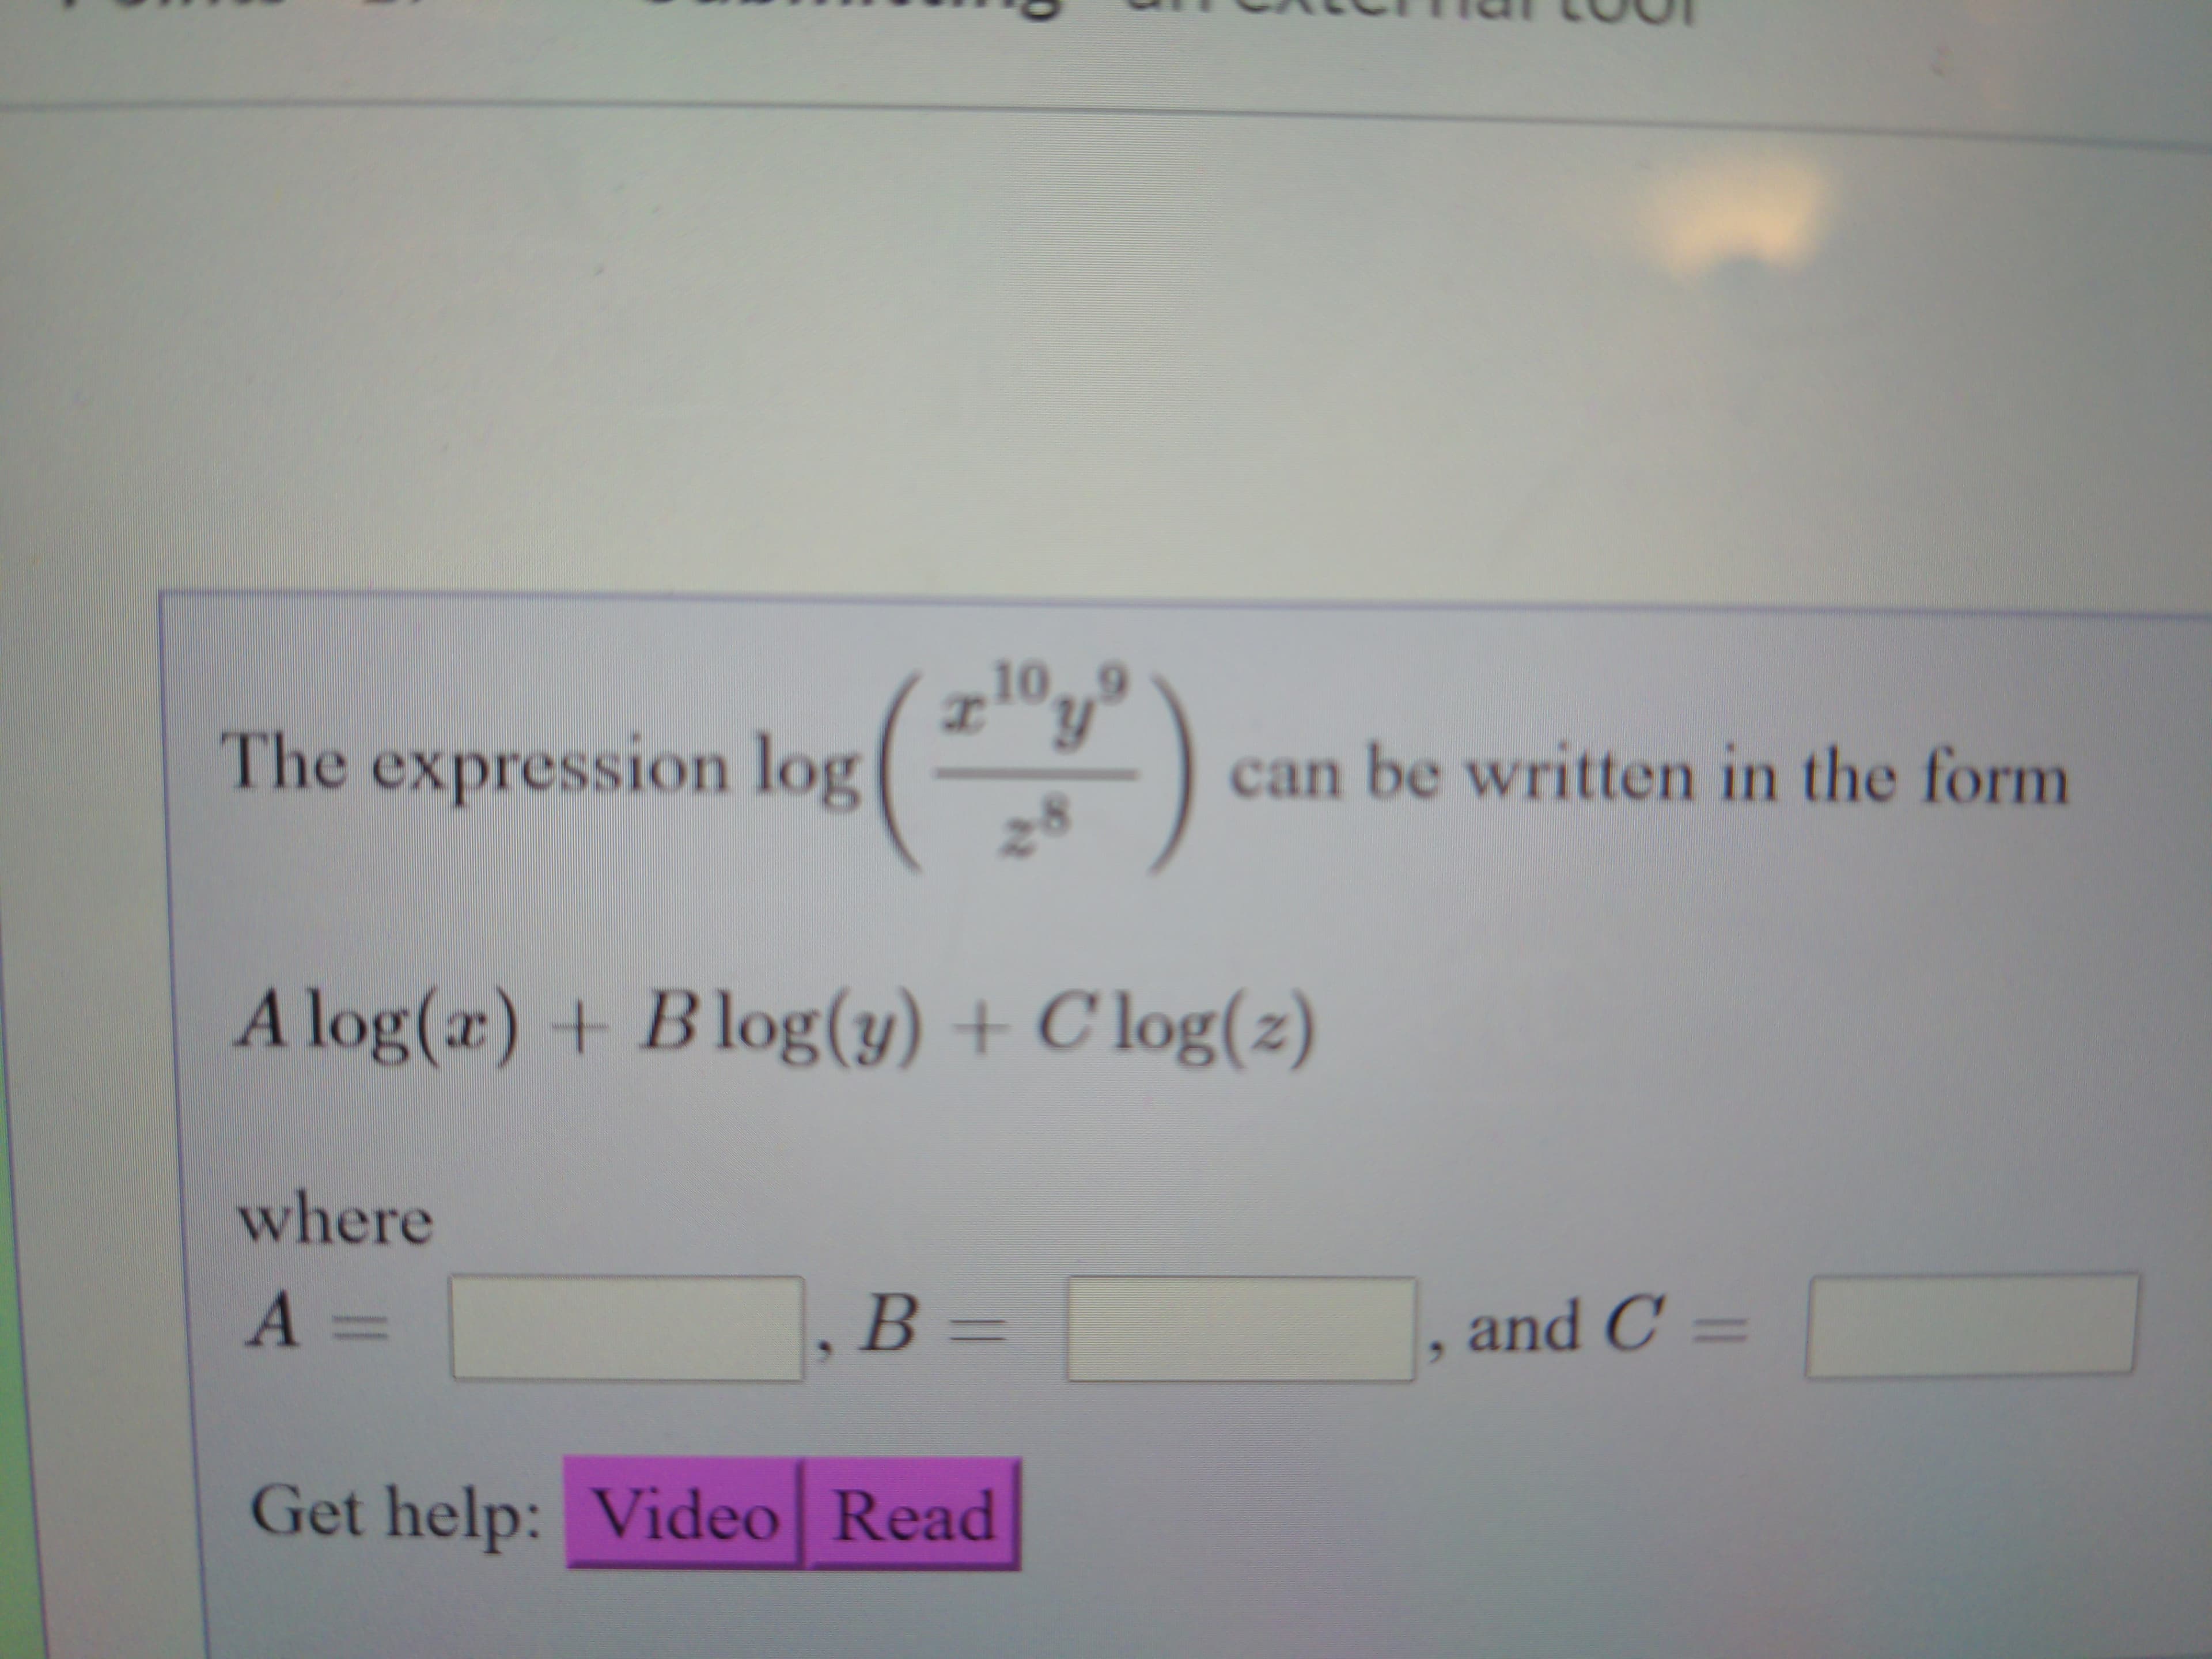 10.9
The expression log
can be written in the form
A log() + Blog(y) + C log(z)
where
A =
B =
and C =
%3D
